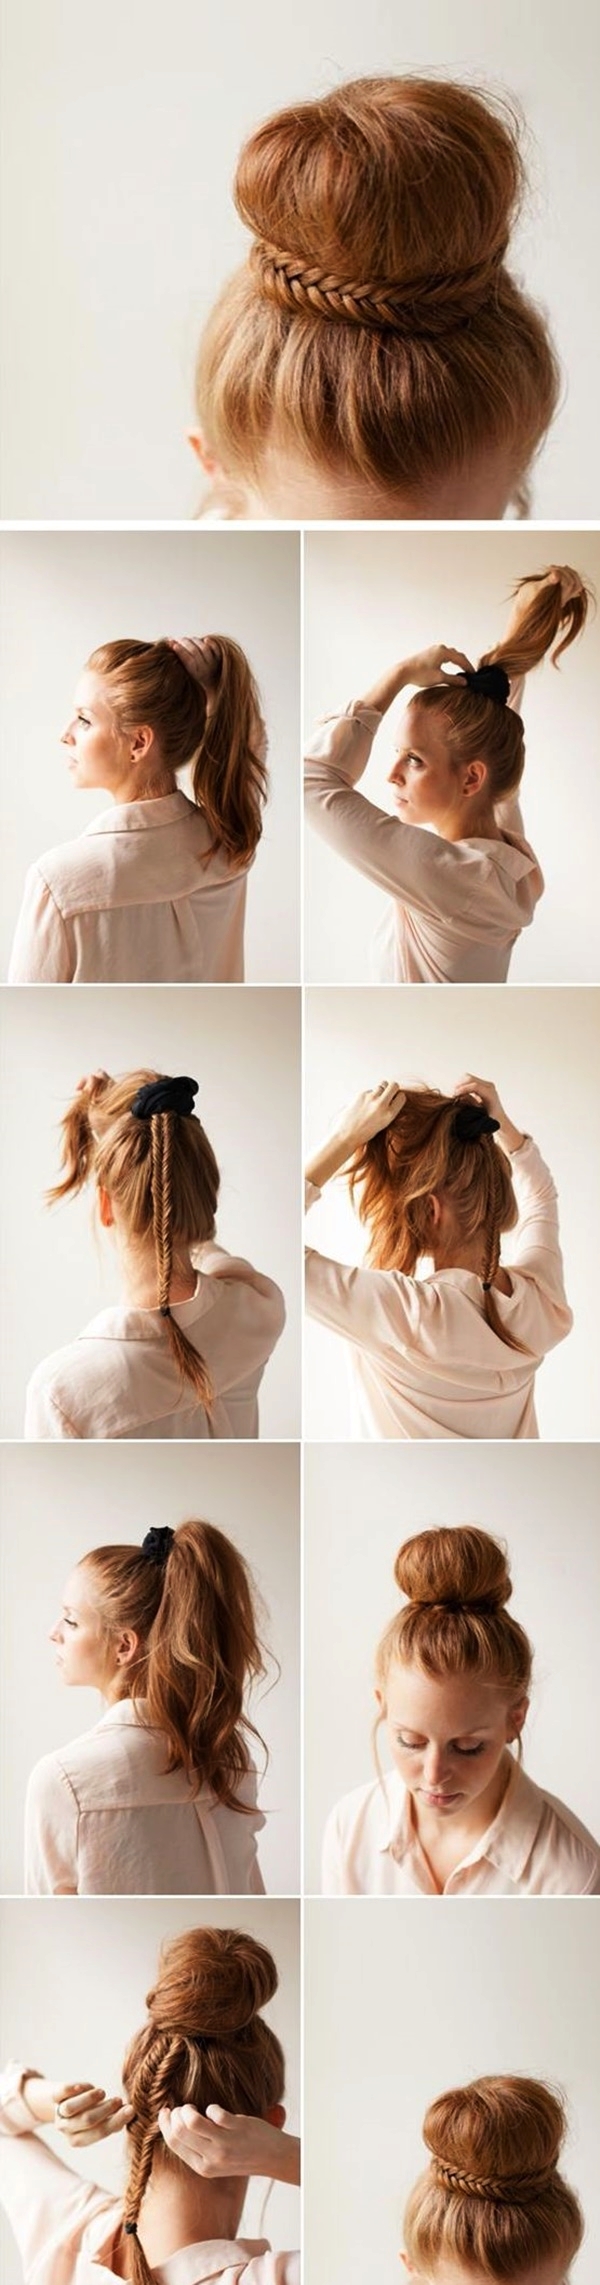 Easy Step By Step Hairstyles for Long Hair2